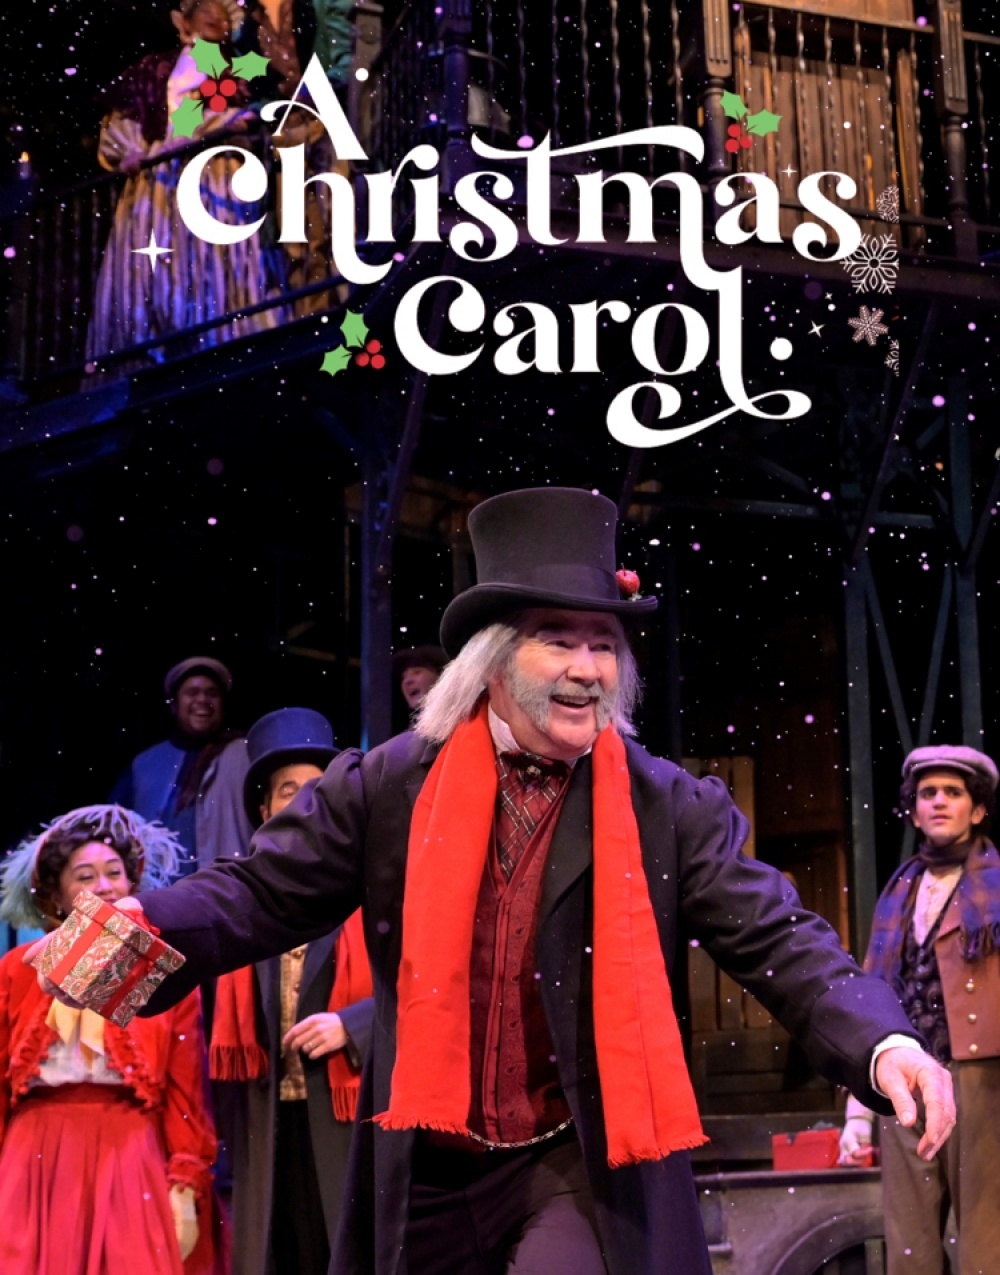 A Christmas Carol at Lesher Center for the Arts